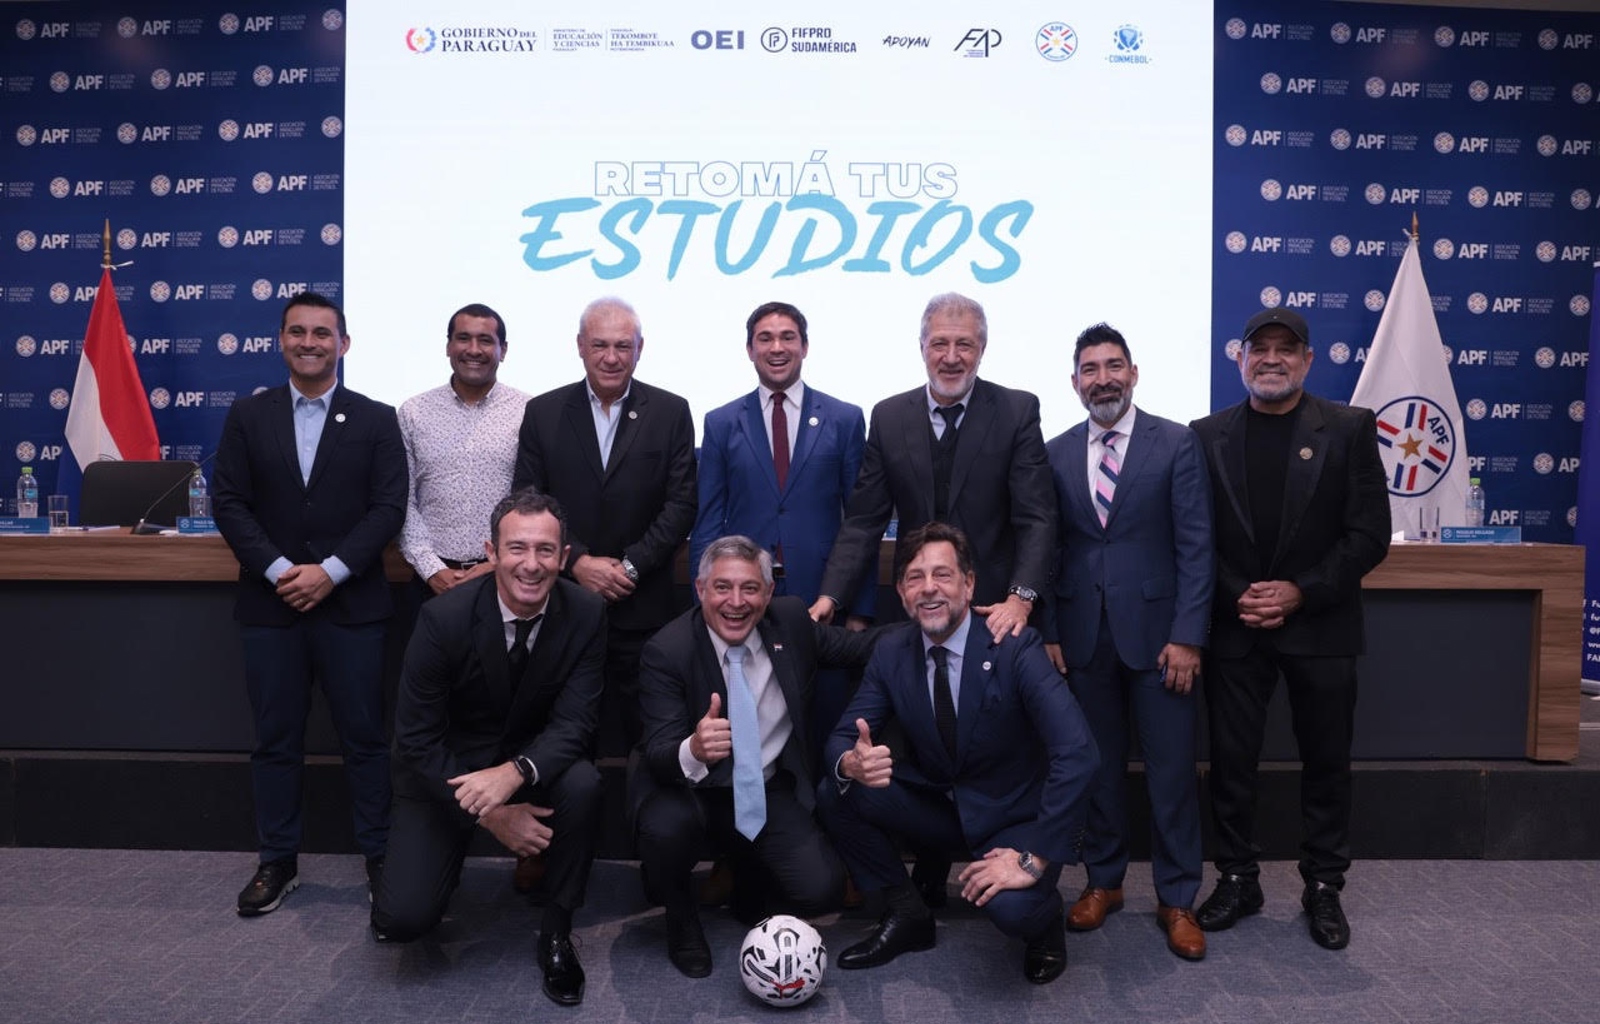 FIFPRO South America Paraguay